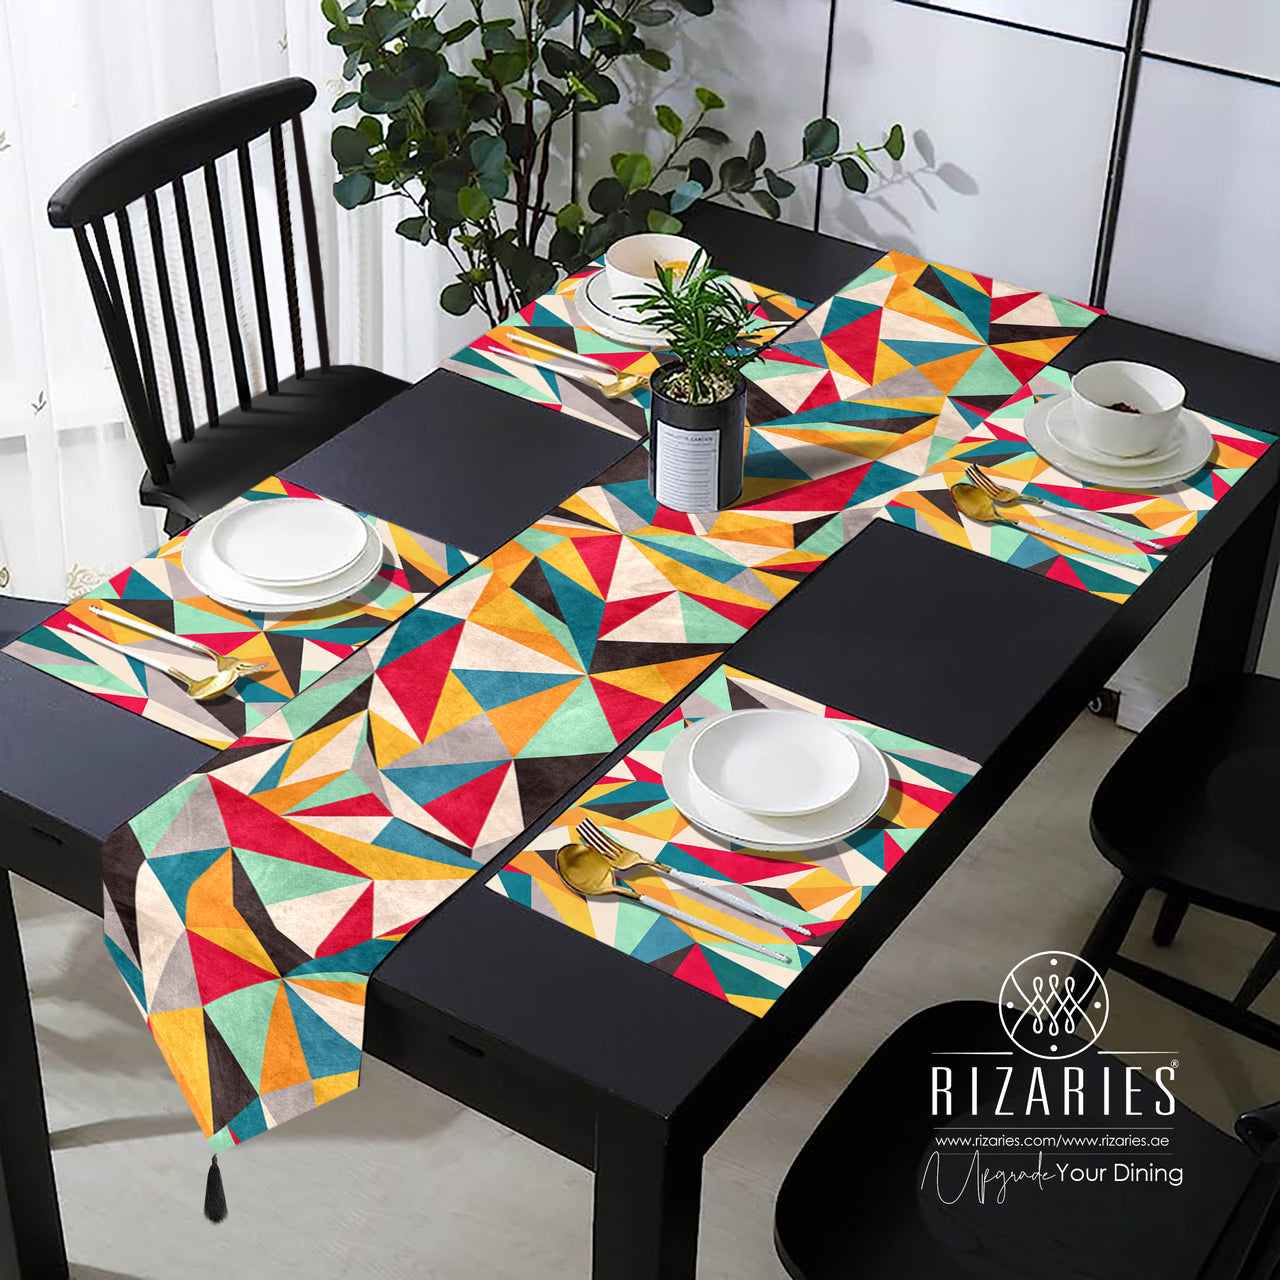 Colorful Geometric Table Style Set